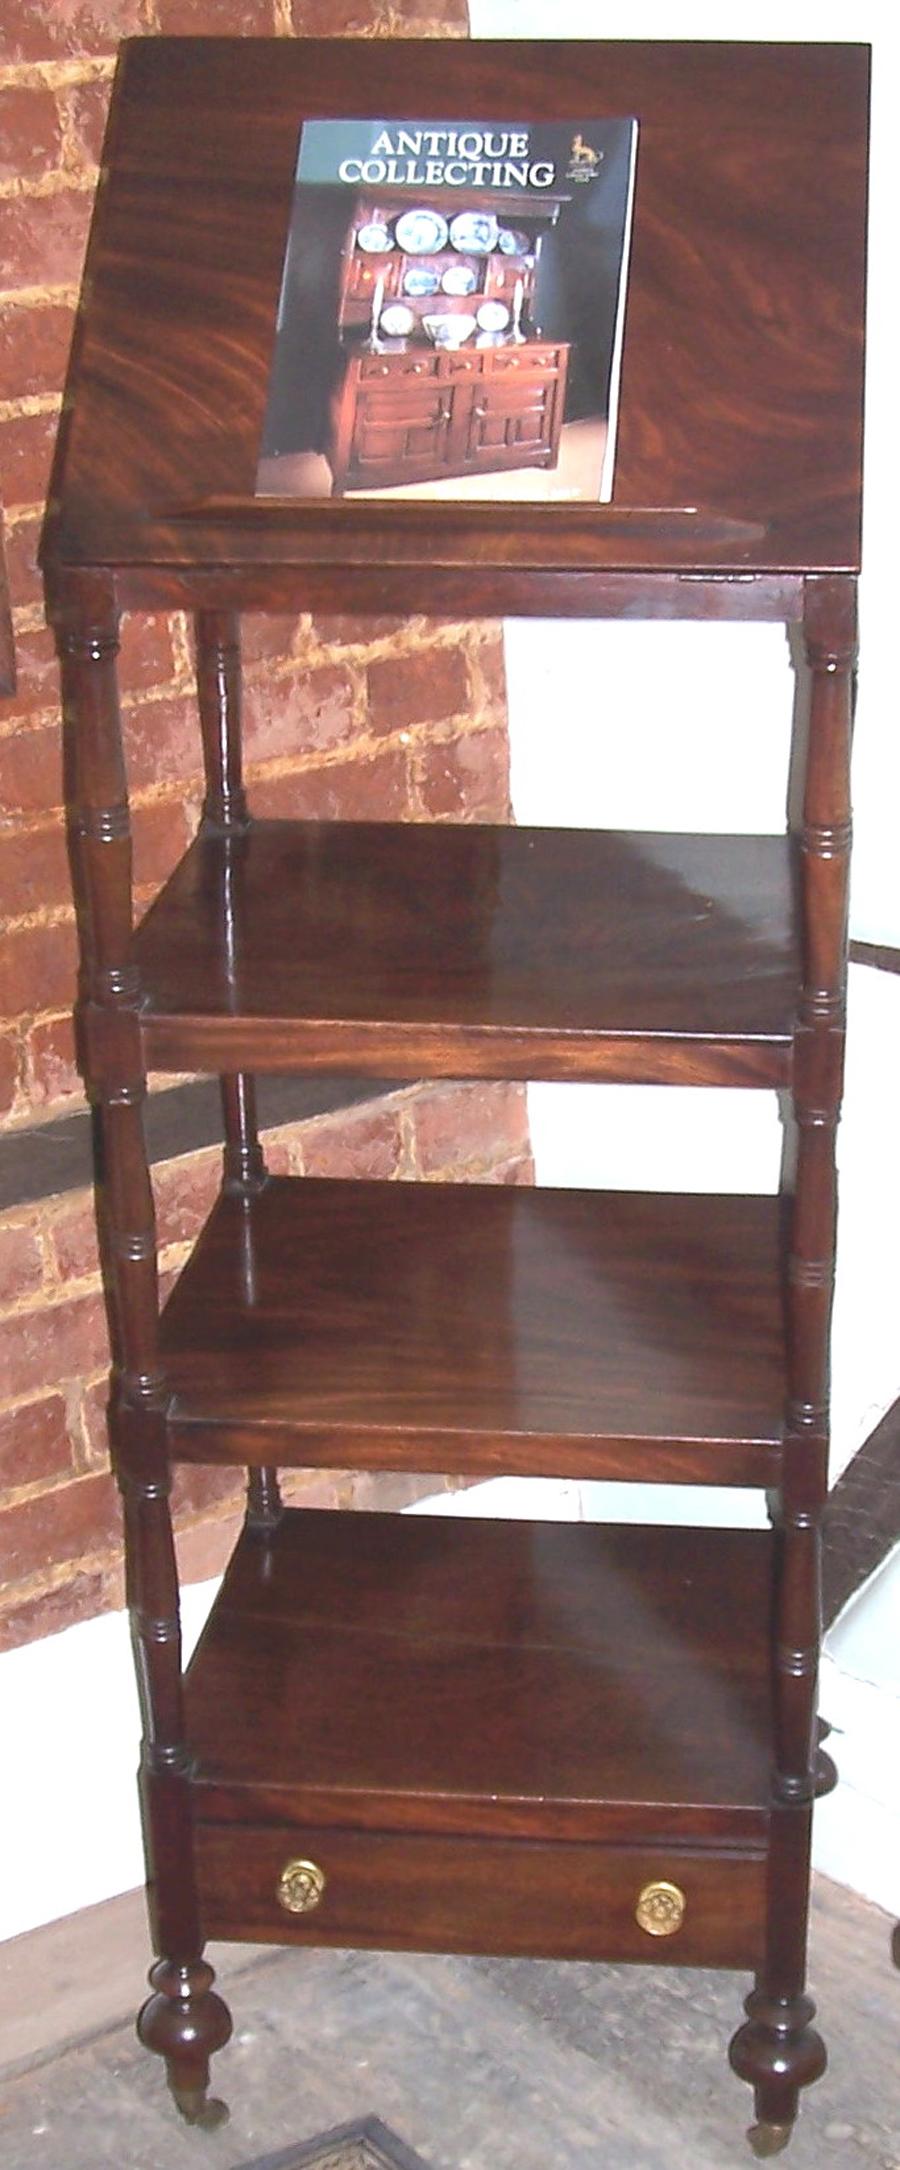 Regency Mahogany 19th Century Rising Top Whatnot In Good Condition For Sale In Bedfordshire, GB